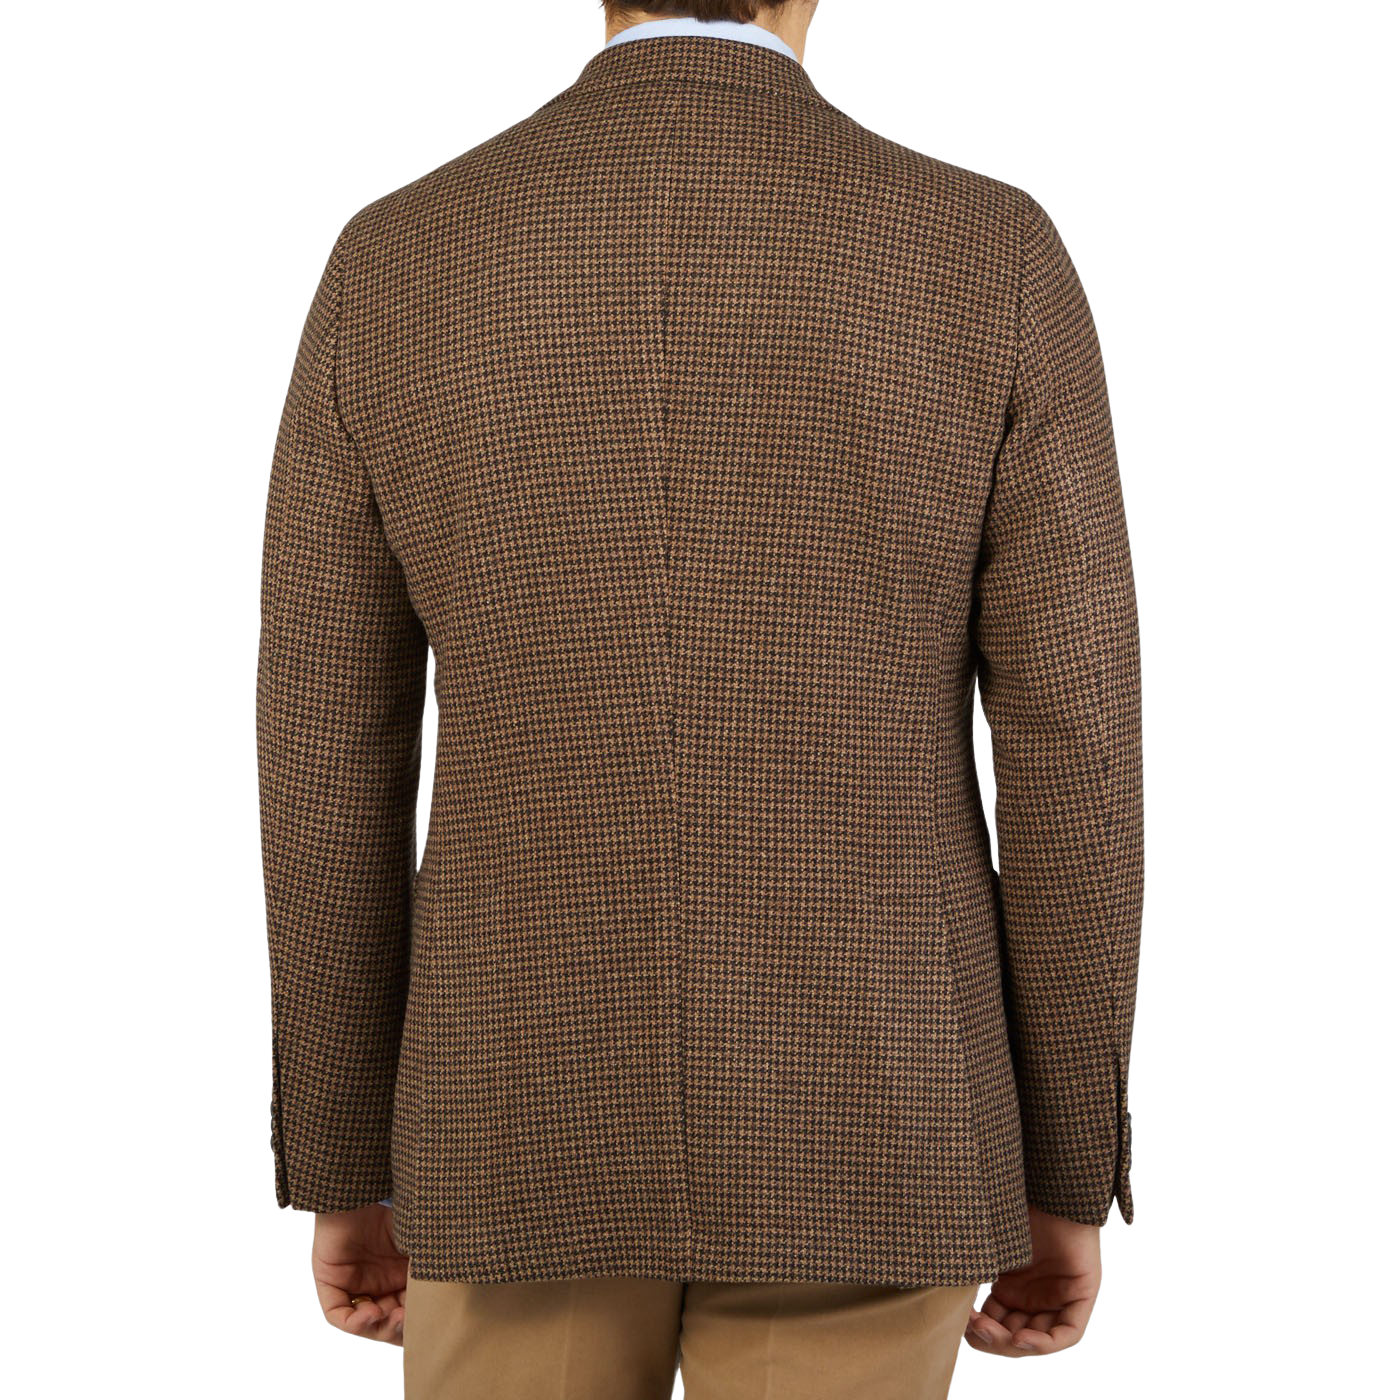 The back view of a man wearing a Studio 73 Brown Houndstooth Wool Cashmere Blazer.